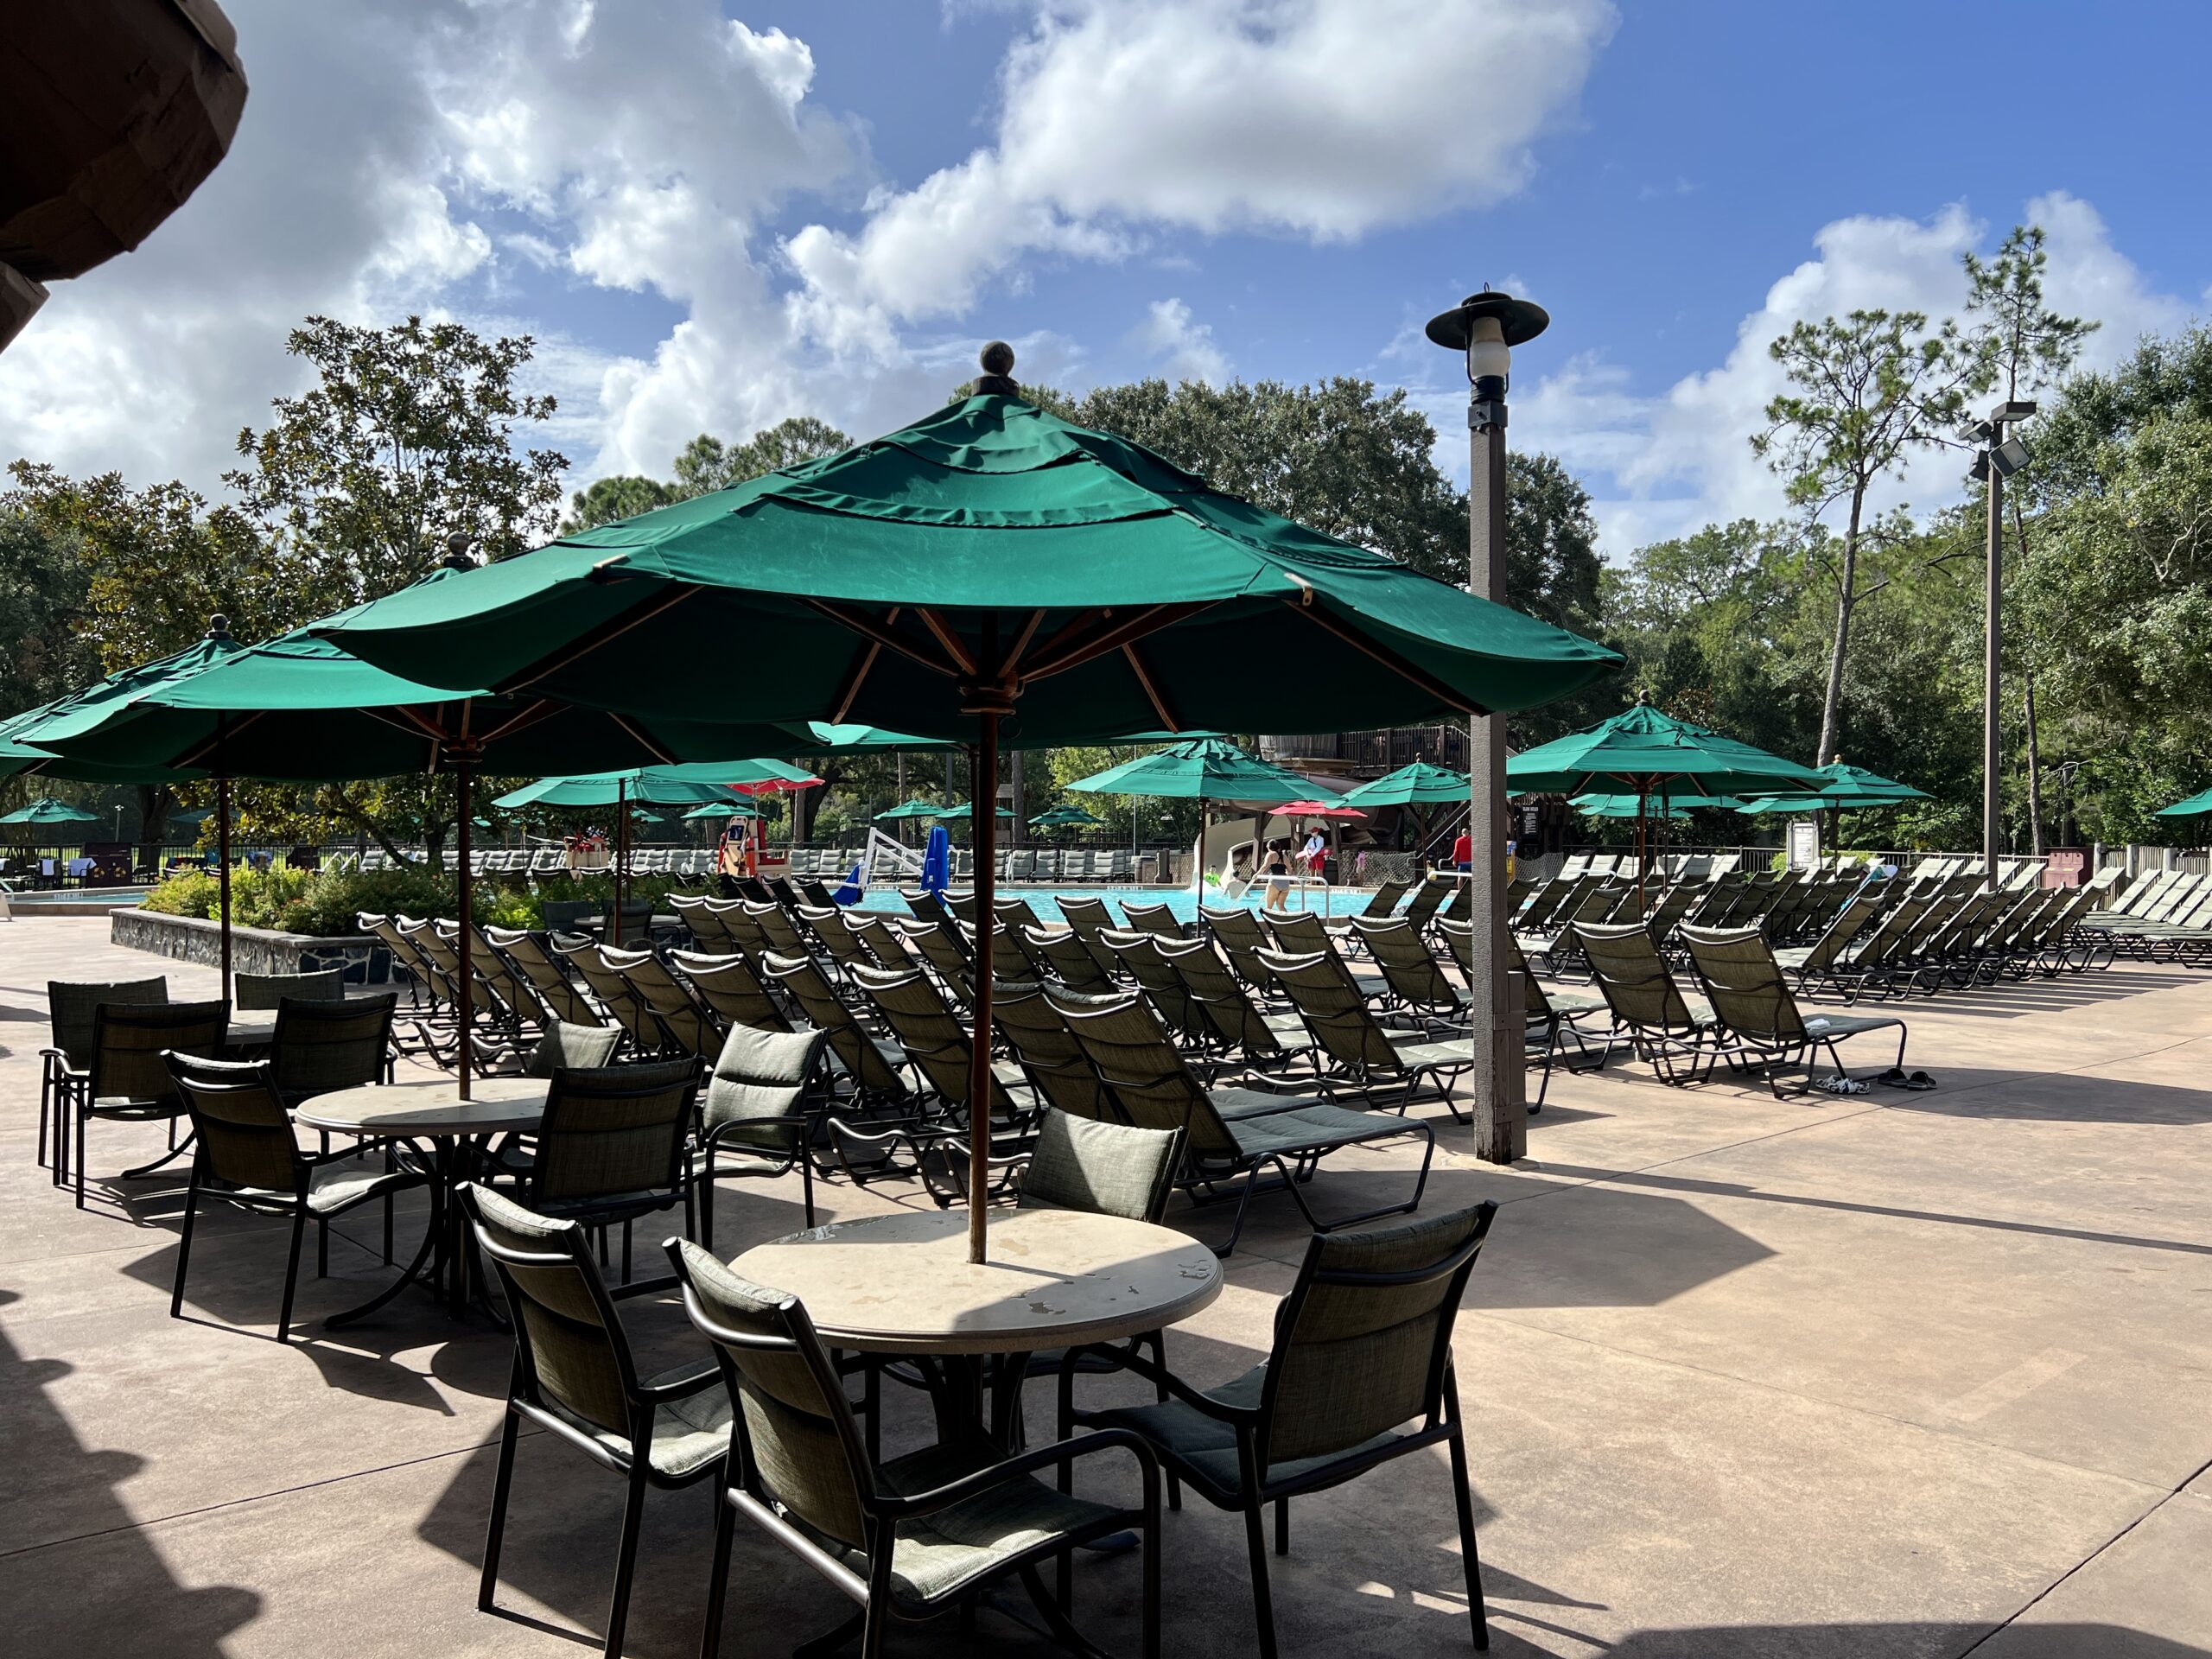 Vibrant pool and hot tub area with ample seating at Disney's Fort Wilderness Resort.